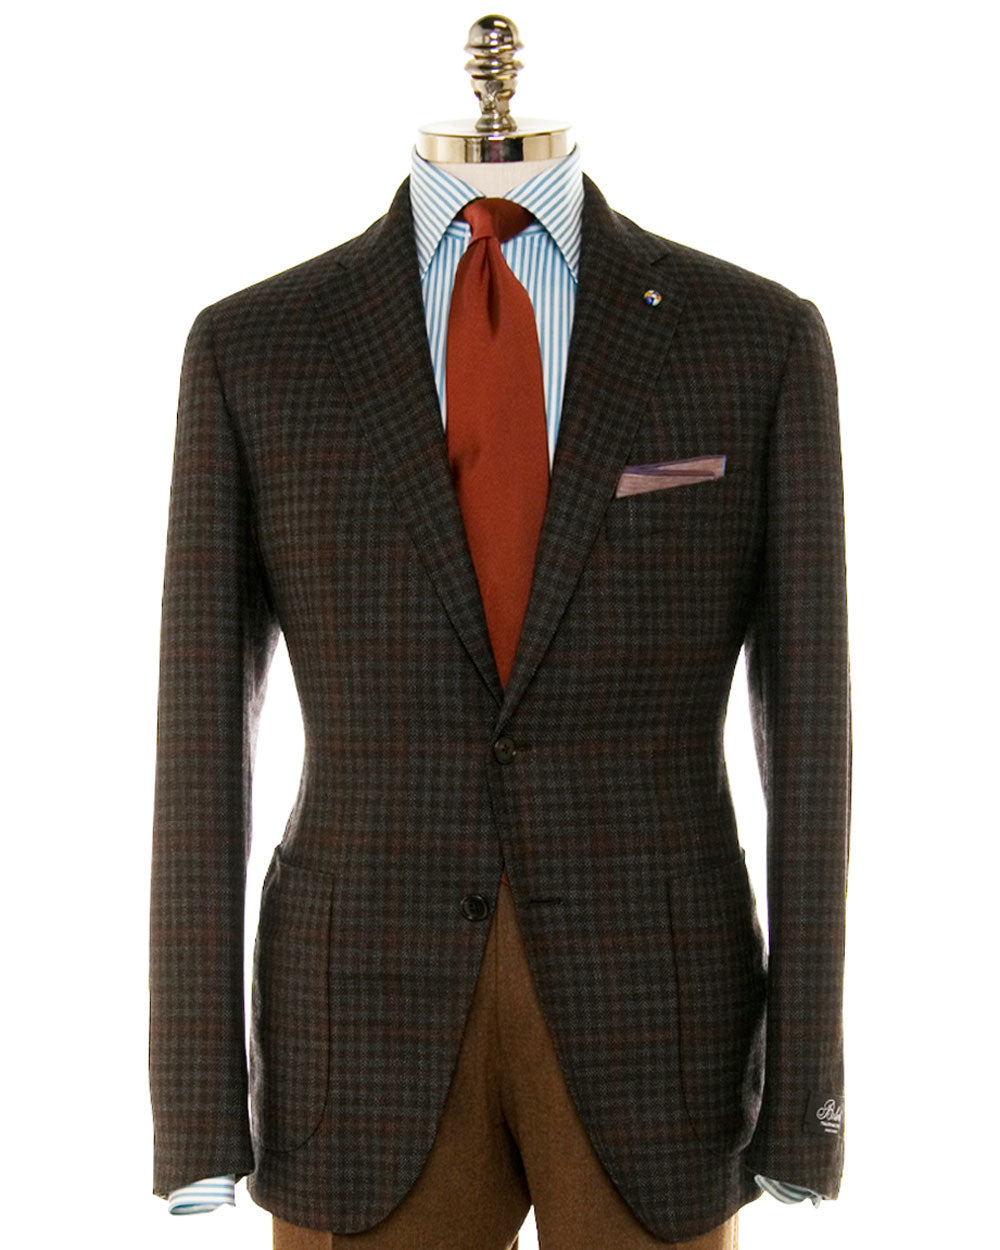 Steel Blue and Orange Check Deconstructed Jacket